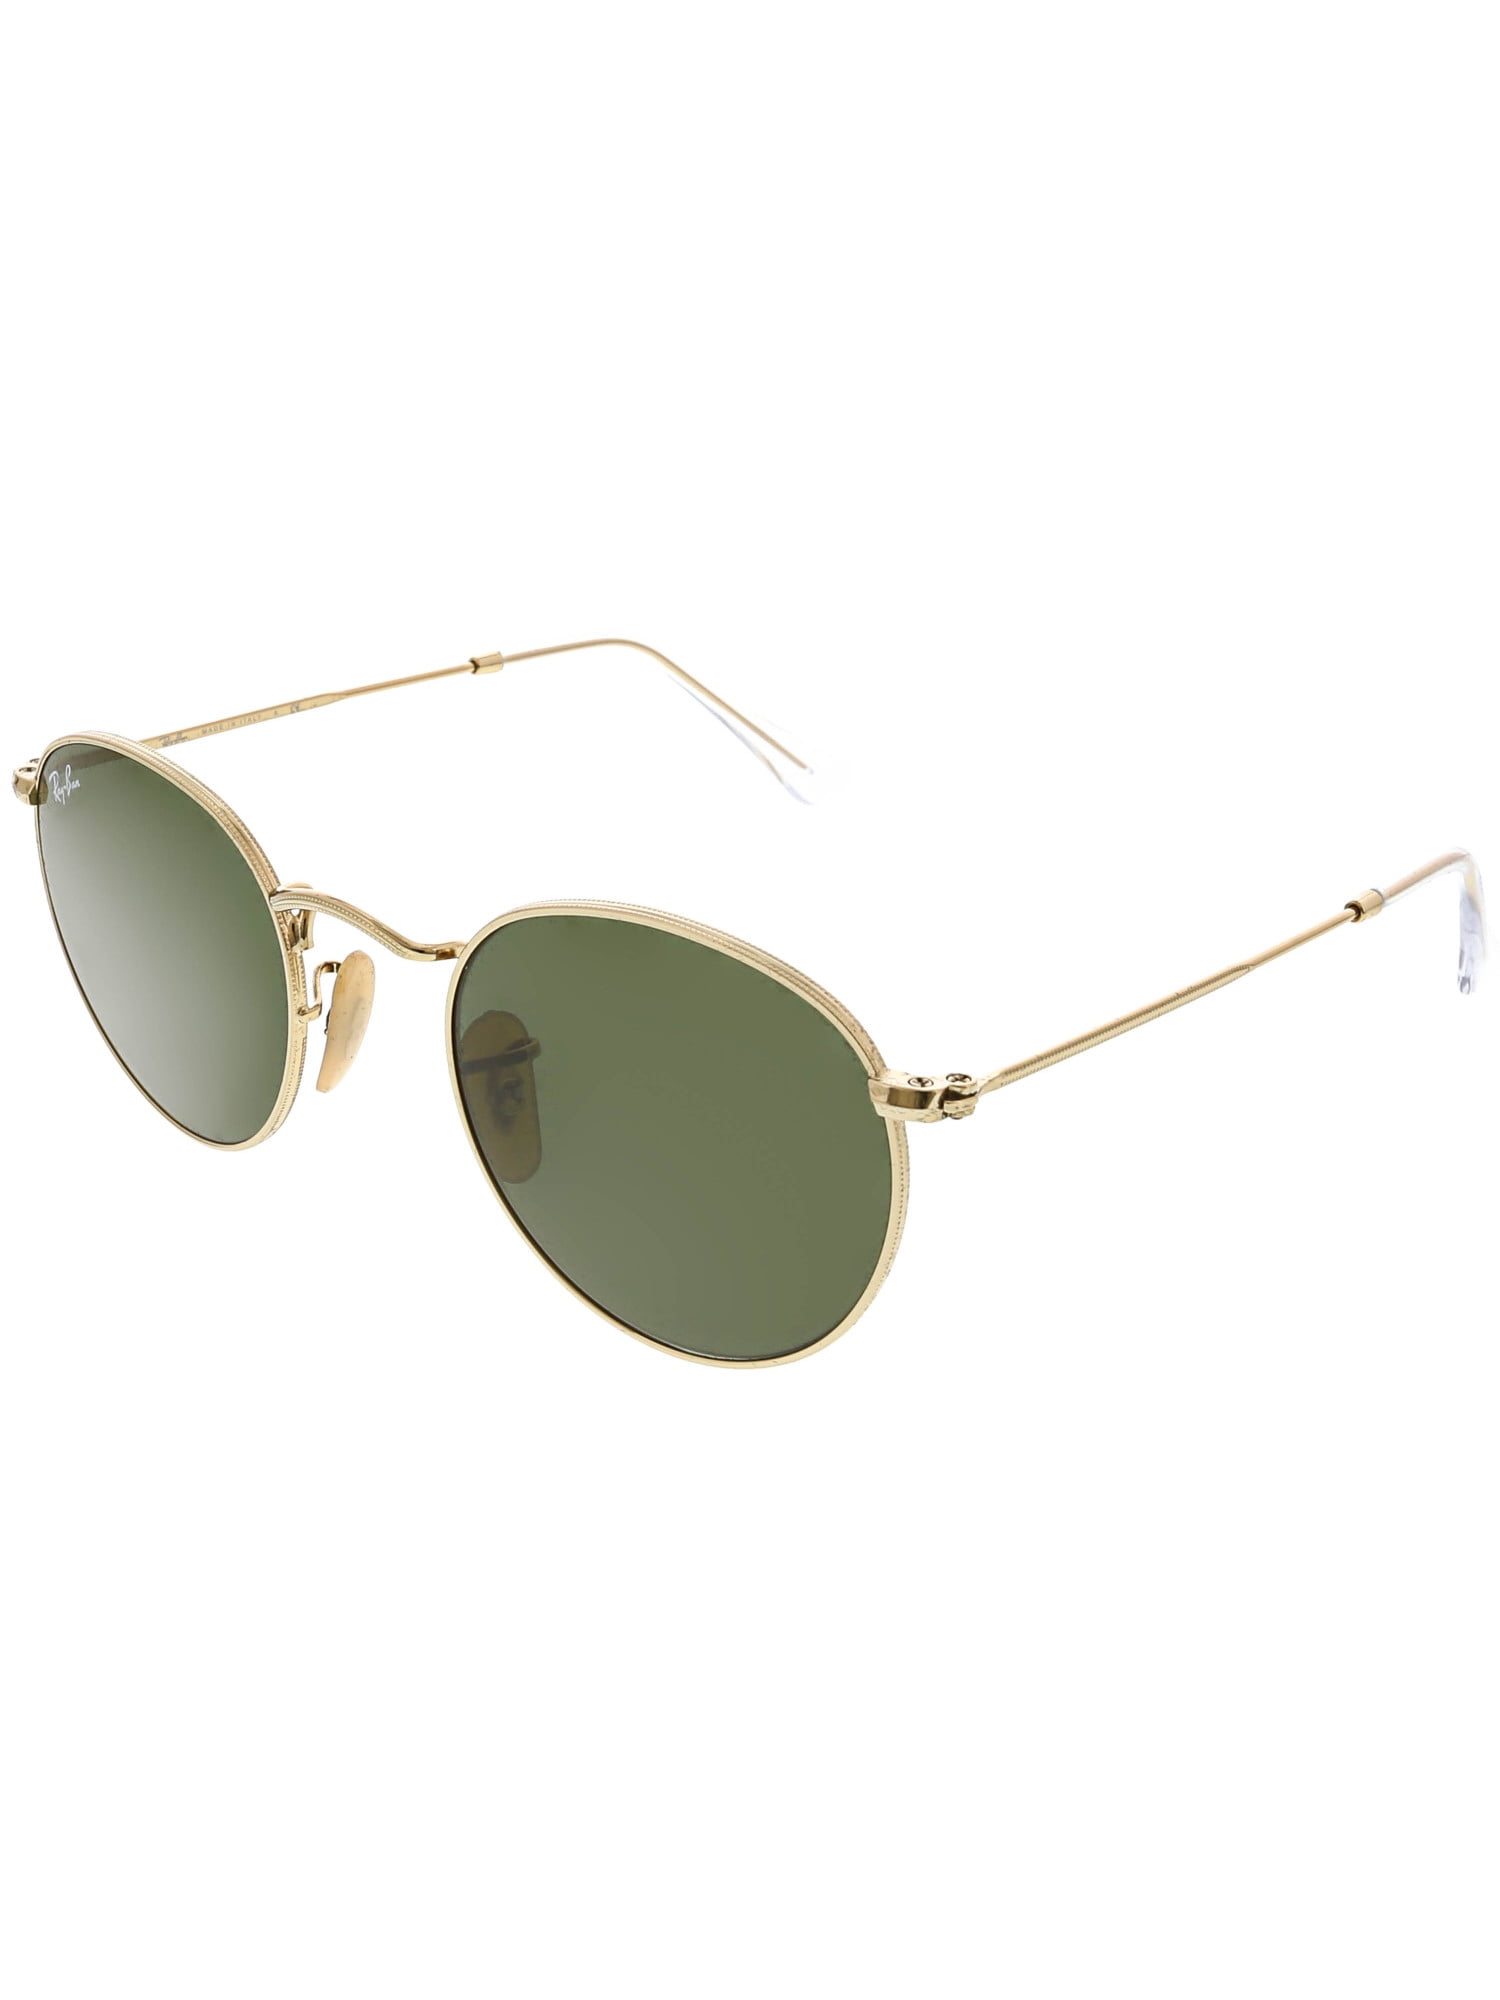 Ray-Ban Round Metal Sunglasses RB3447 001 - Polished Gold Frame - Green Classic G-15 Lenses - 53mm